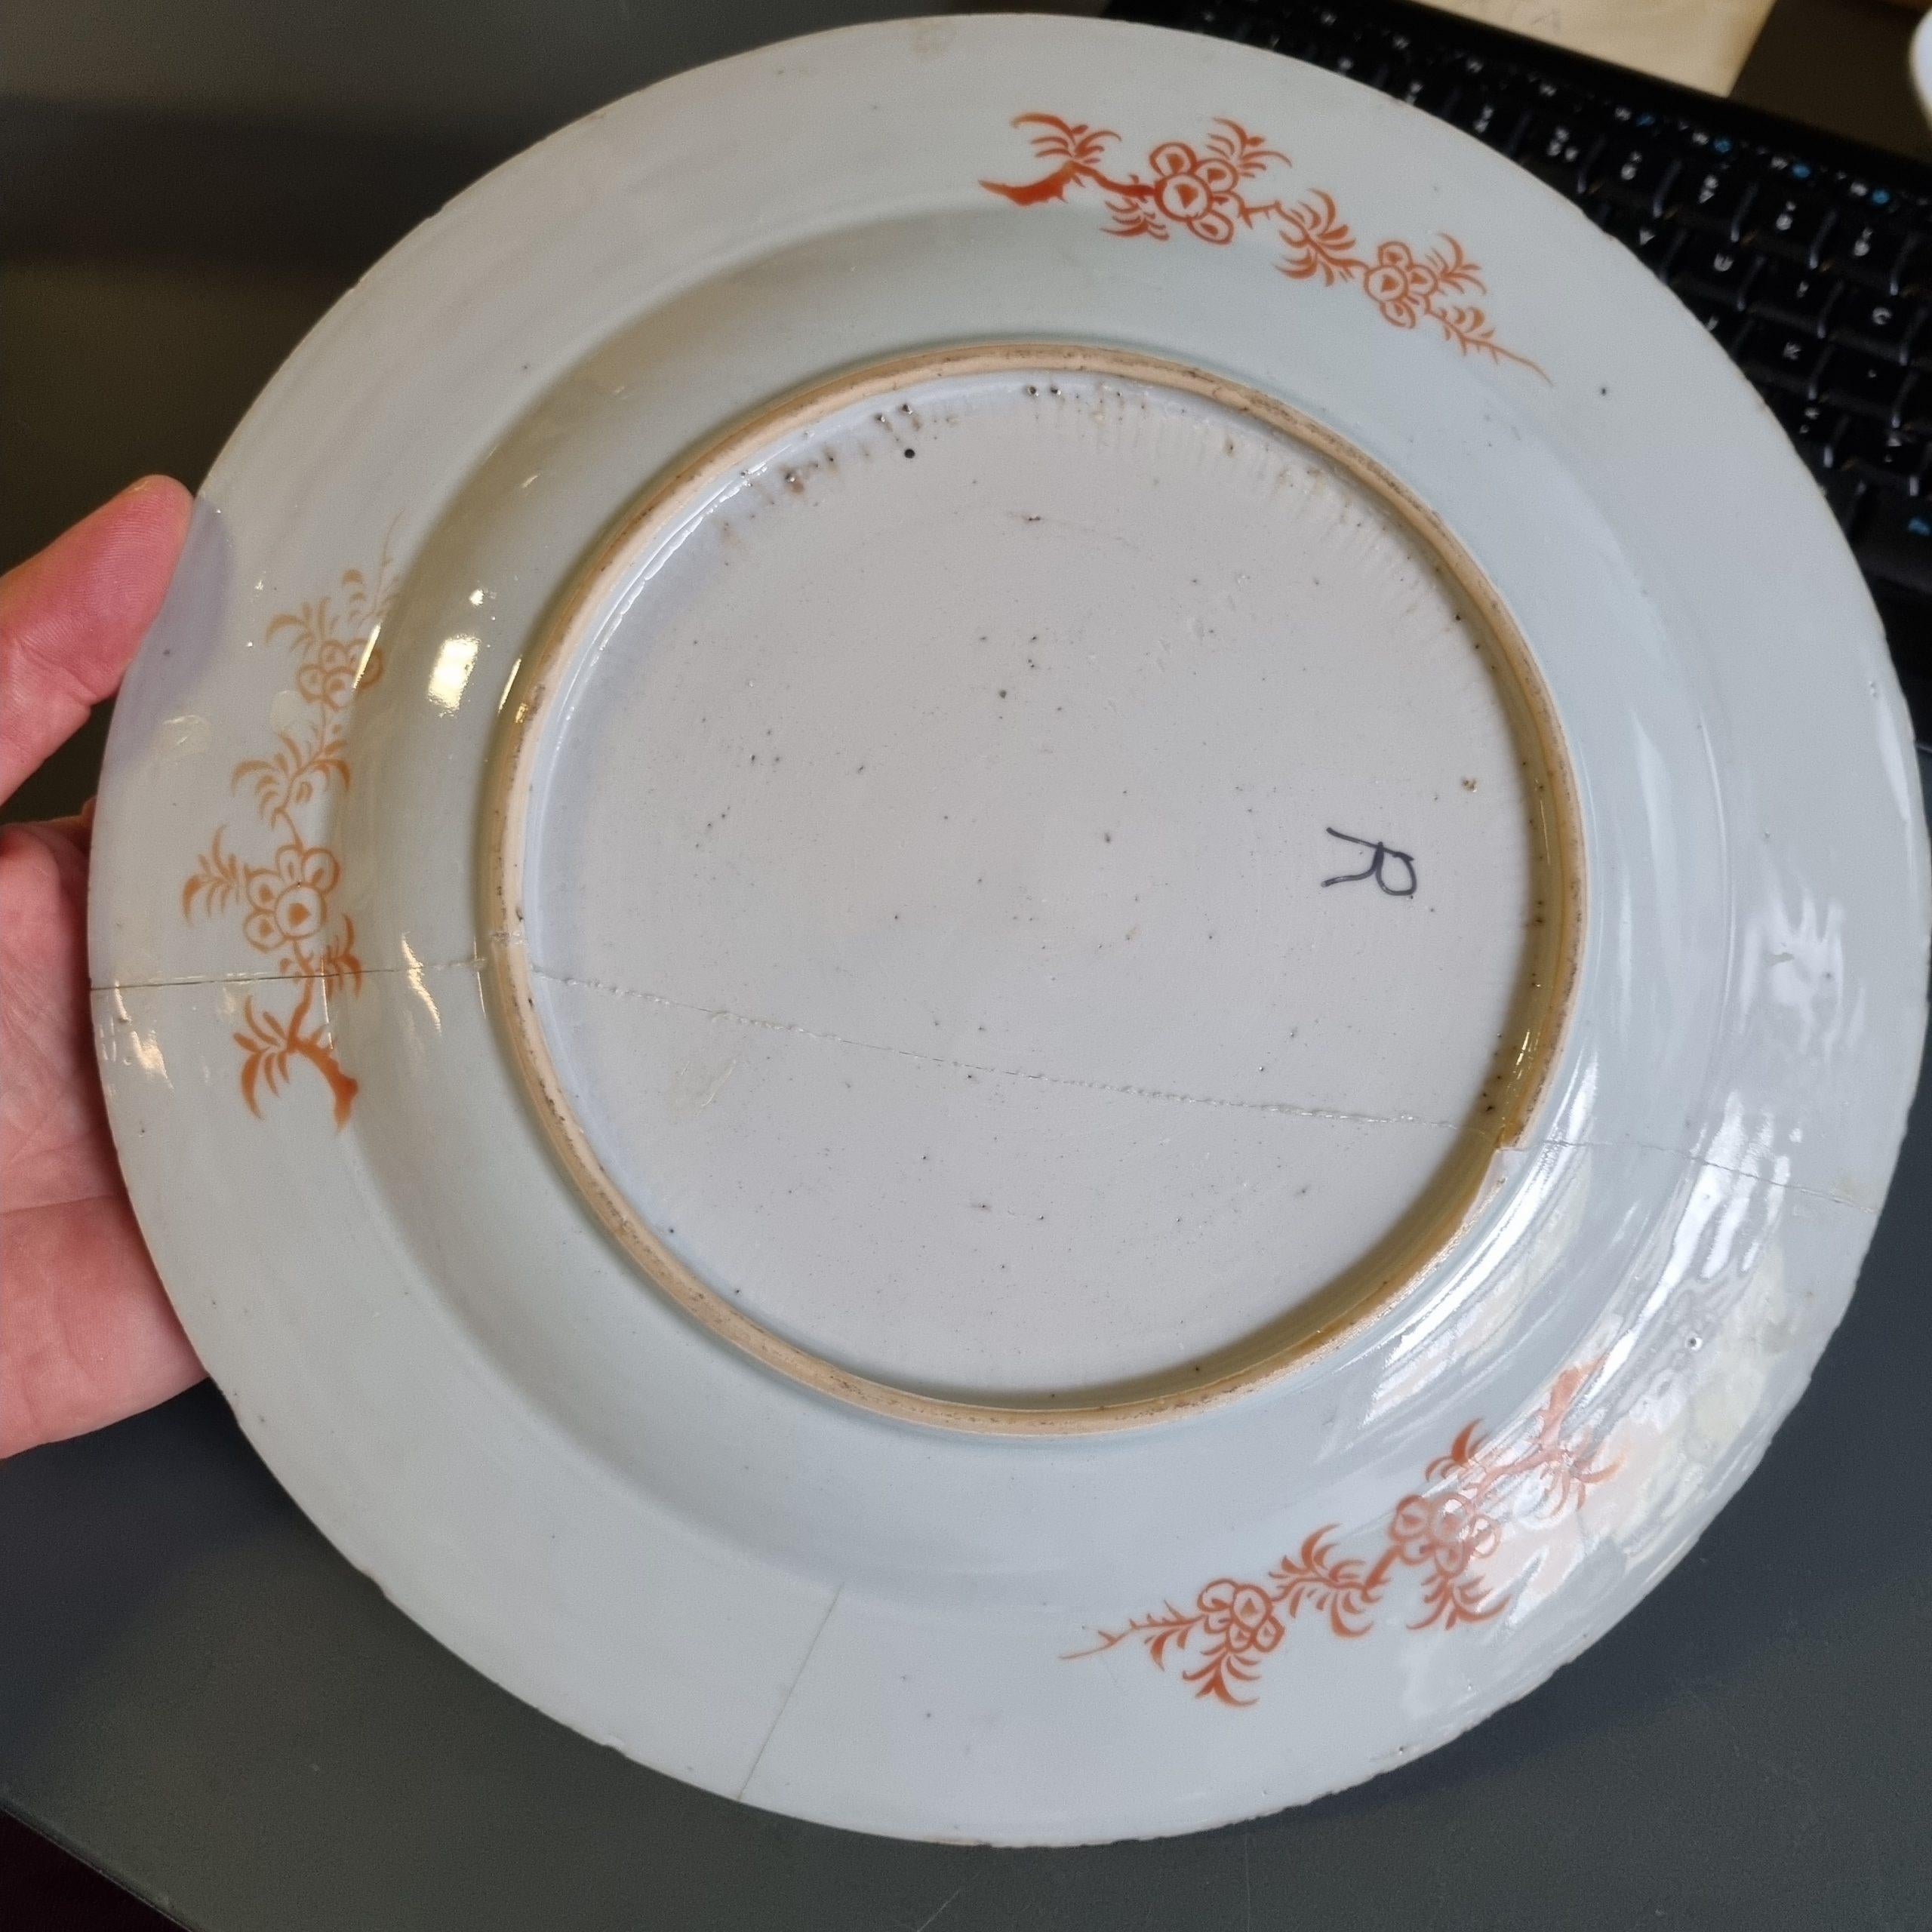 Pair of Antique Chinese Porcelain Plates Dishes Amsterdam Bont, 18th Century For Sale 1